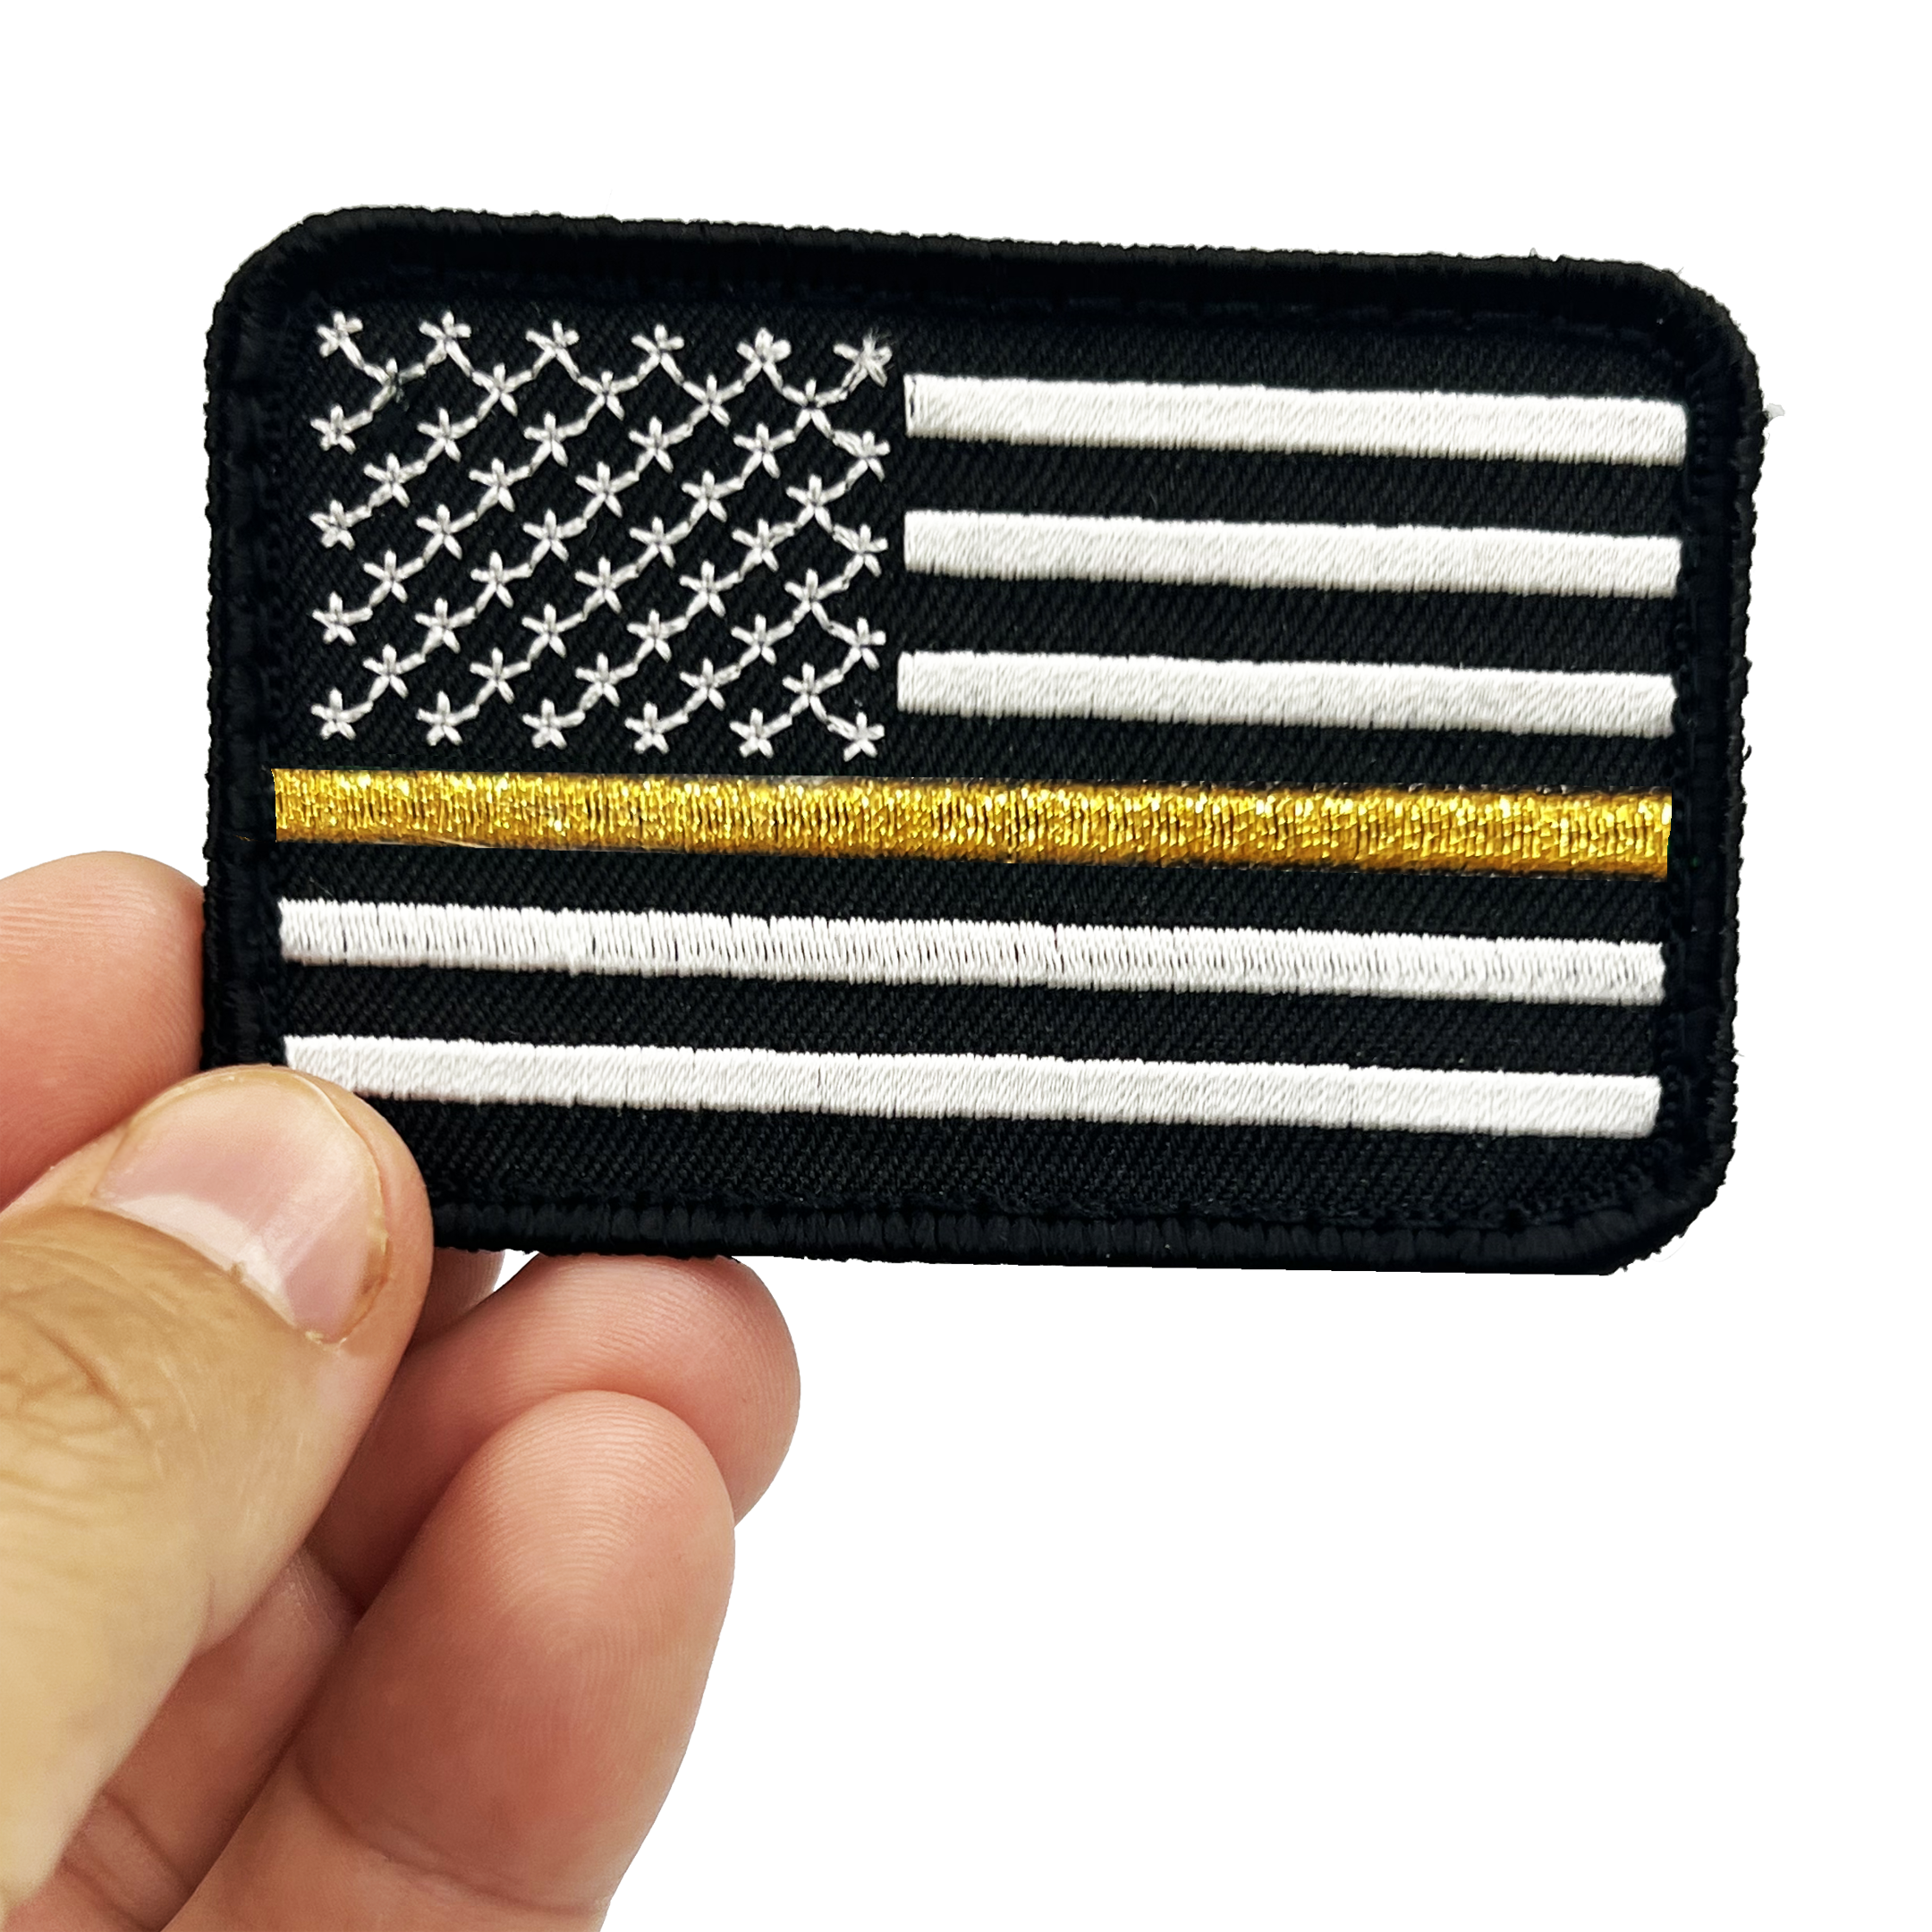 EL12-021 Thin Gold Line Tactical Subdued American Flag Patch with hook and loop back embroidered Dispatcher yellow trucker